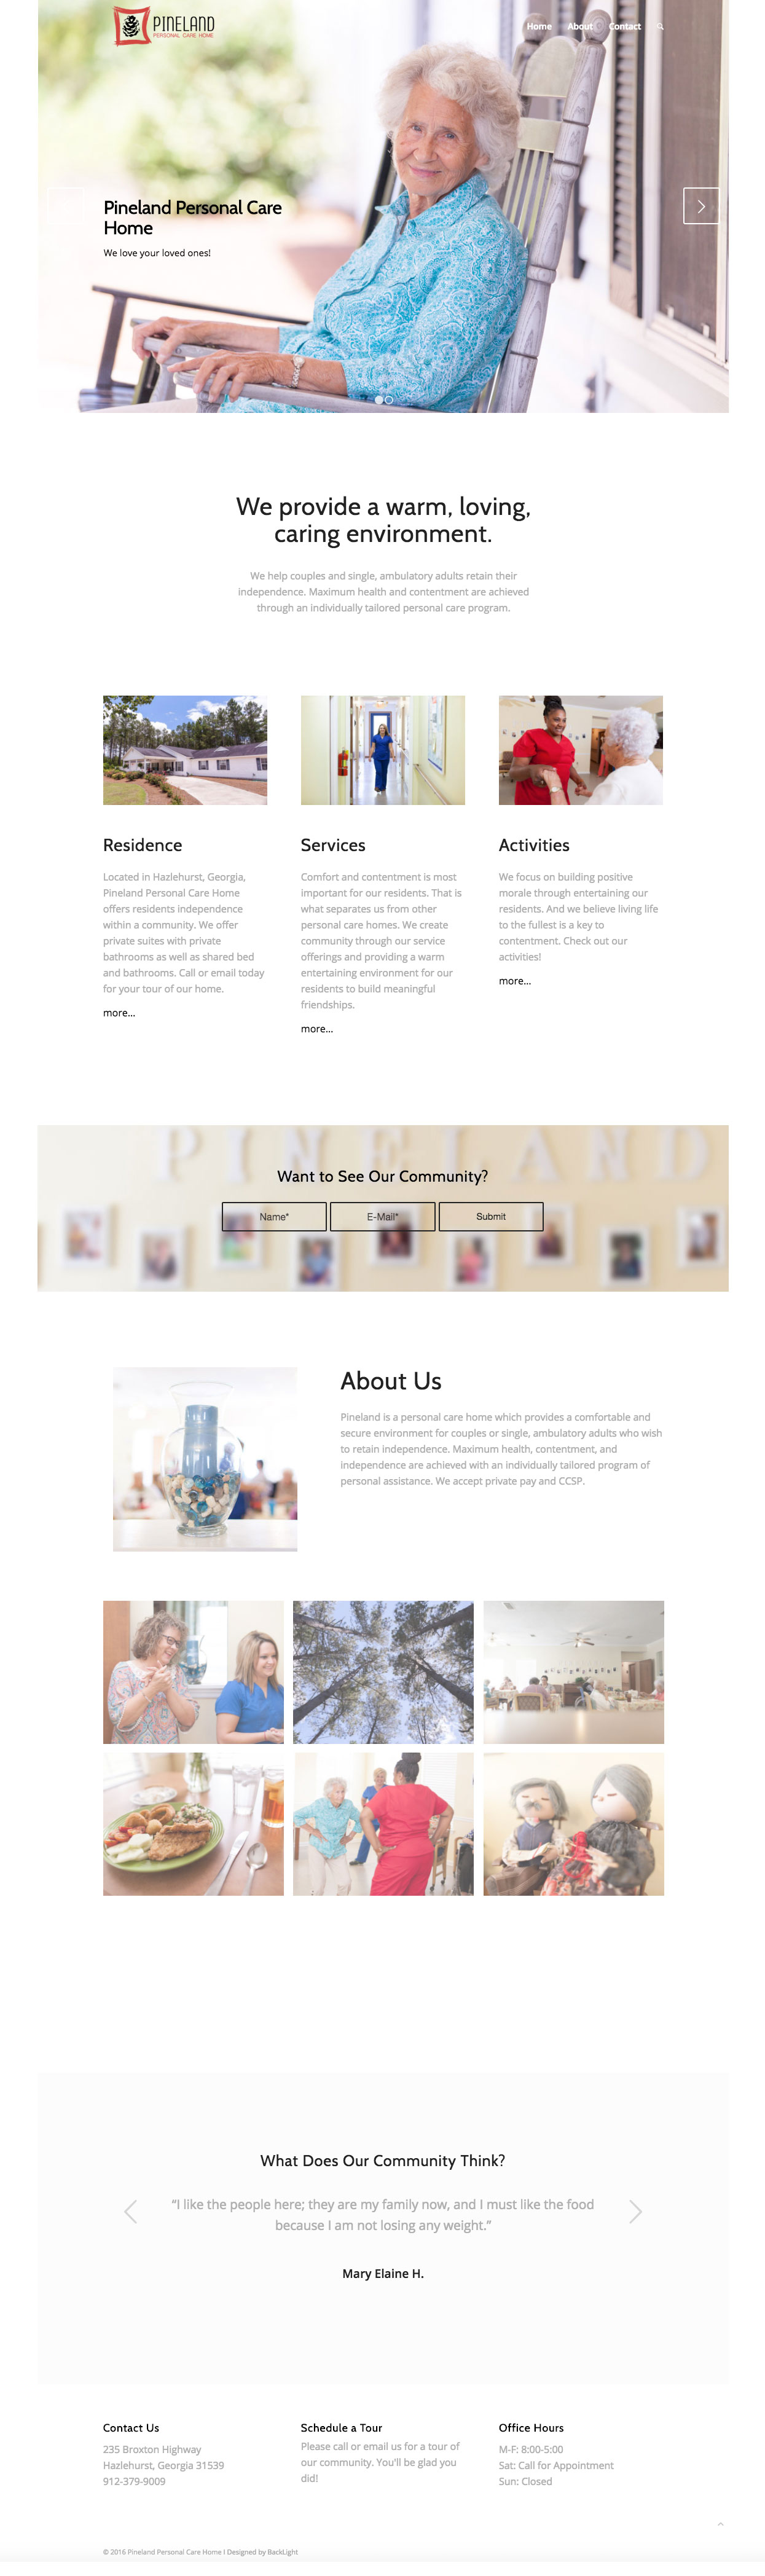 web-design-commercial-photogrpahy-pineland-personal-care-home